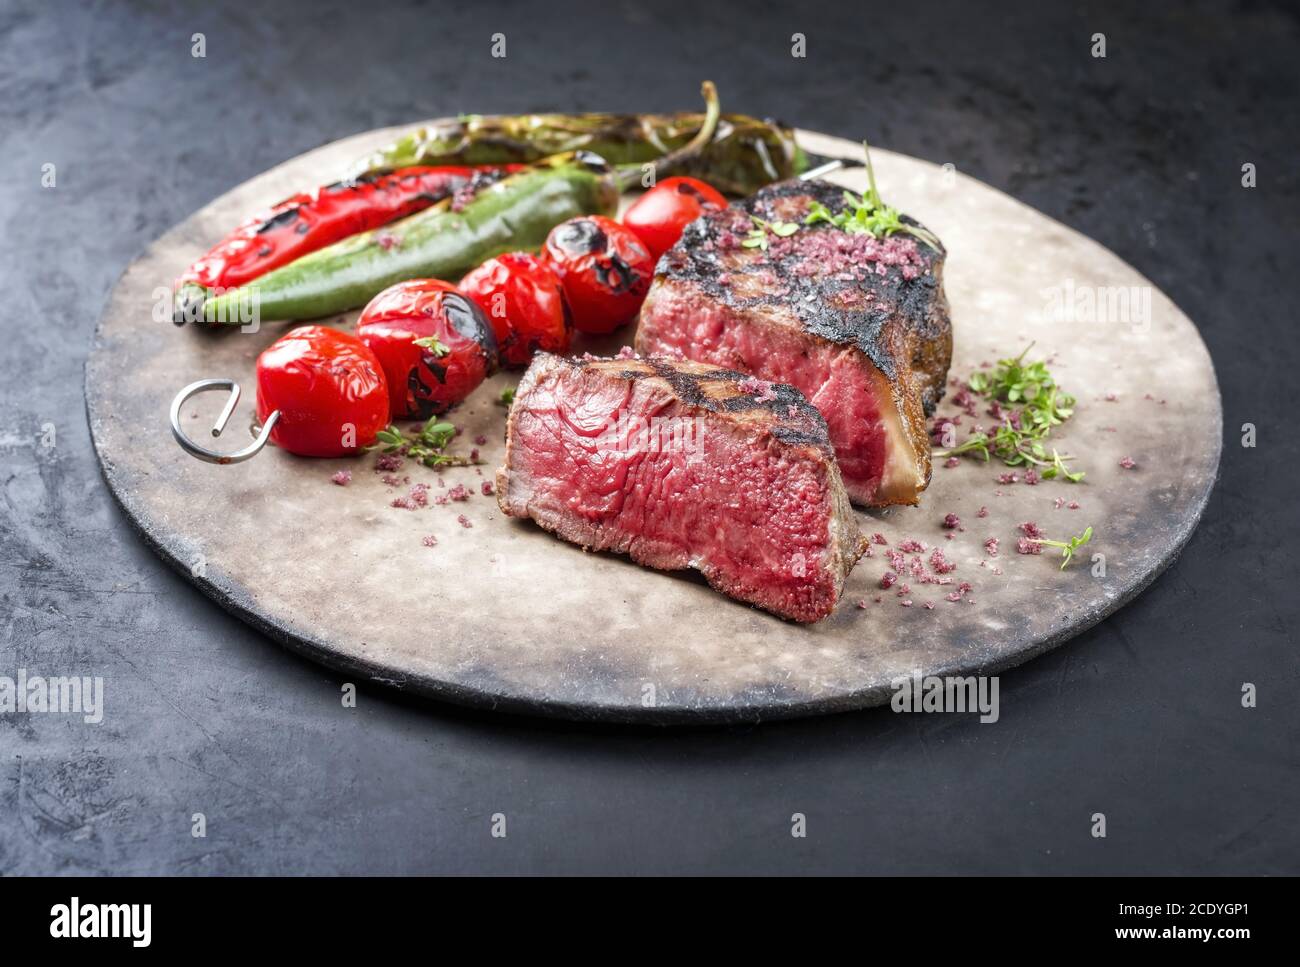 Barbecue dry aged wagyu roast beef steak with tomatoes and chili as closeup on a rustic modern design plate Stock Photo